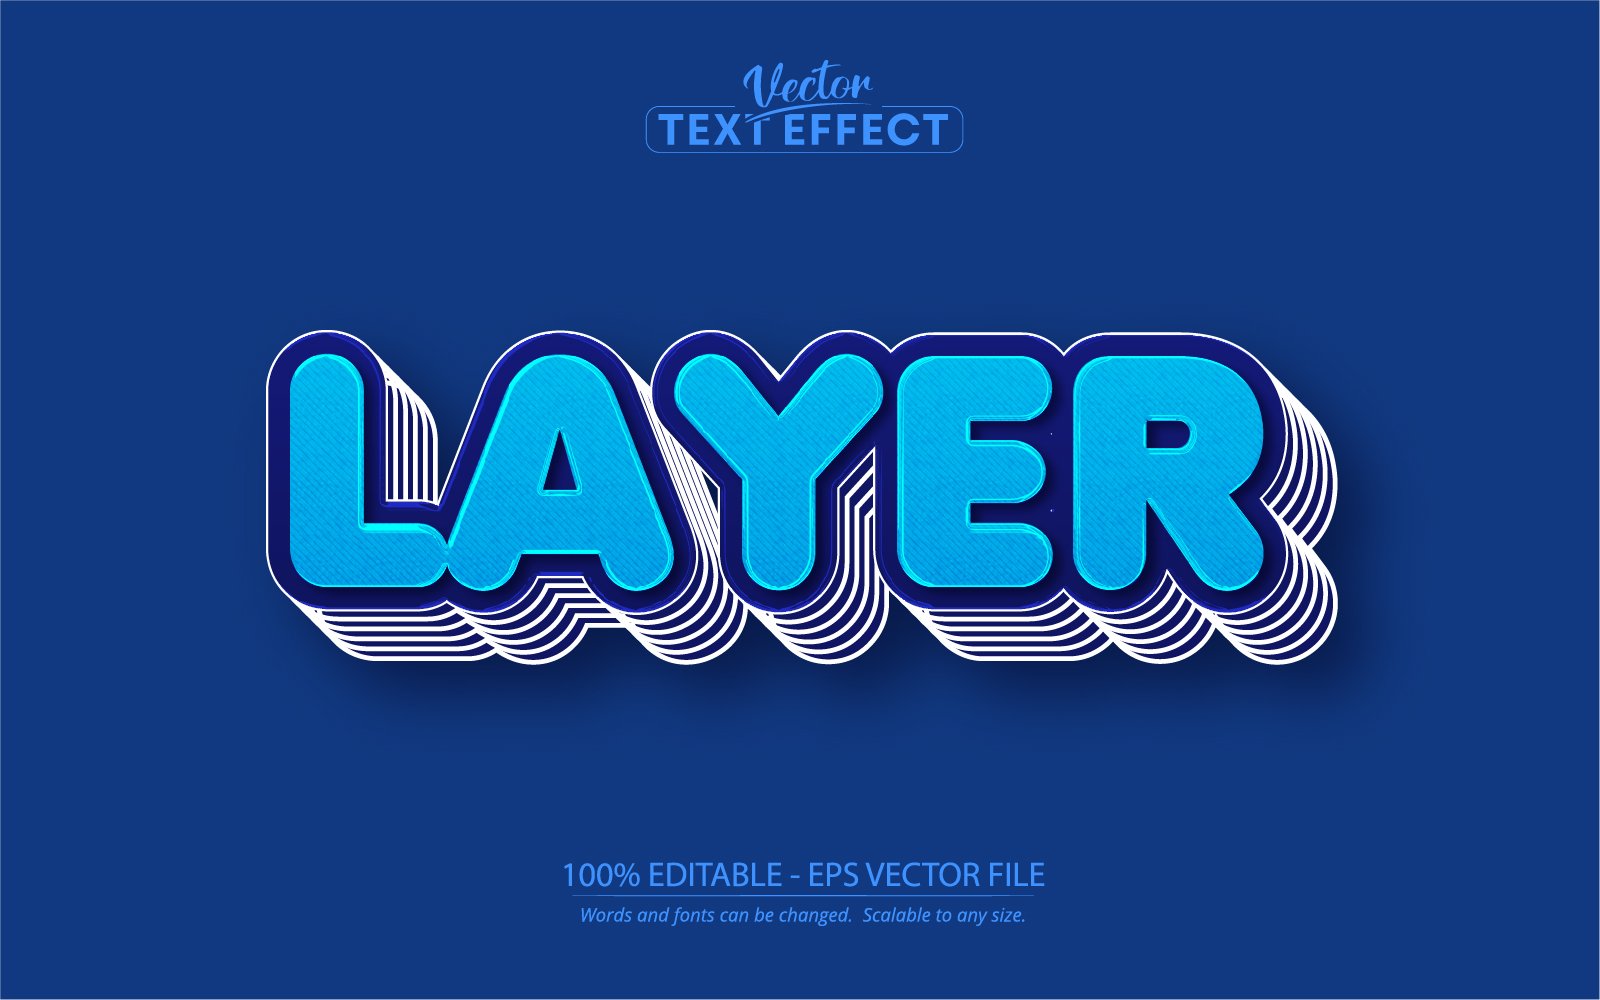 Layer - Editable Text Effect, Comic And Cartoon Text Style, Graphics Illustration